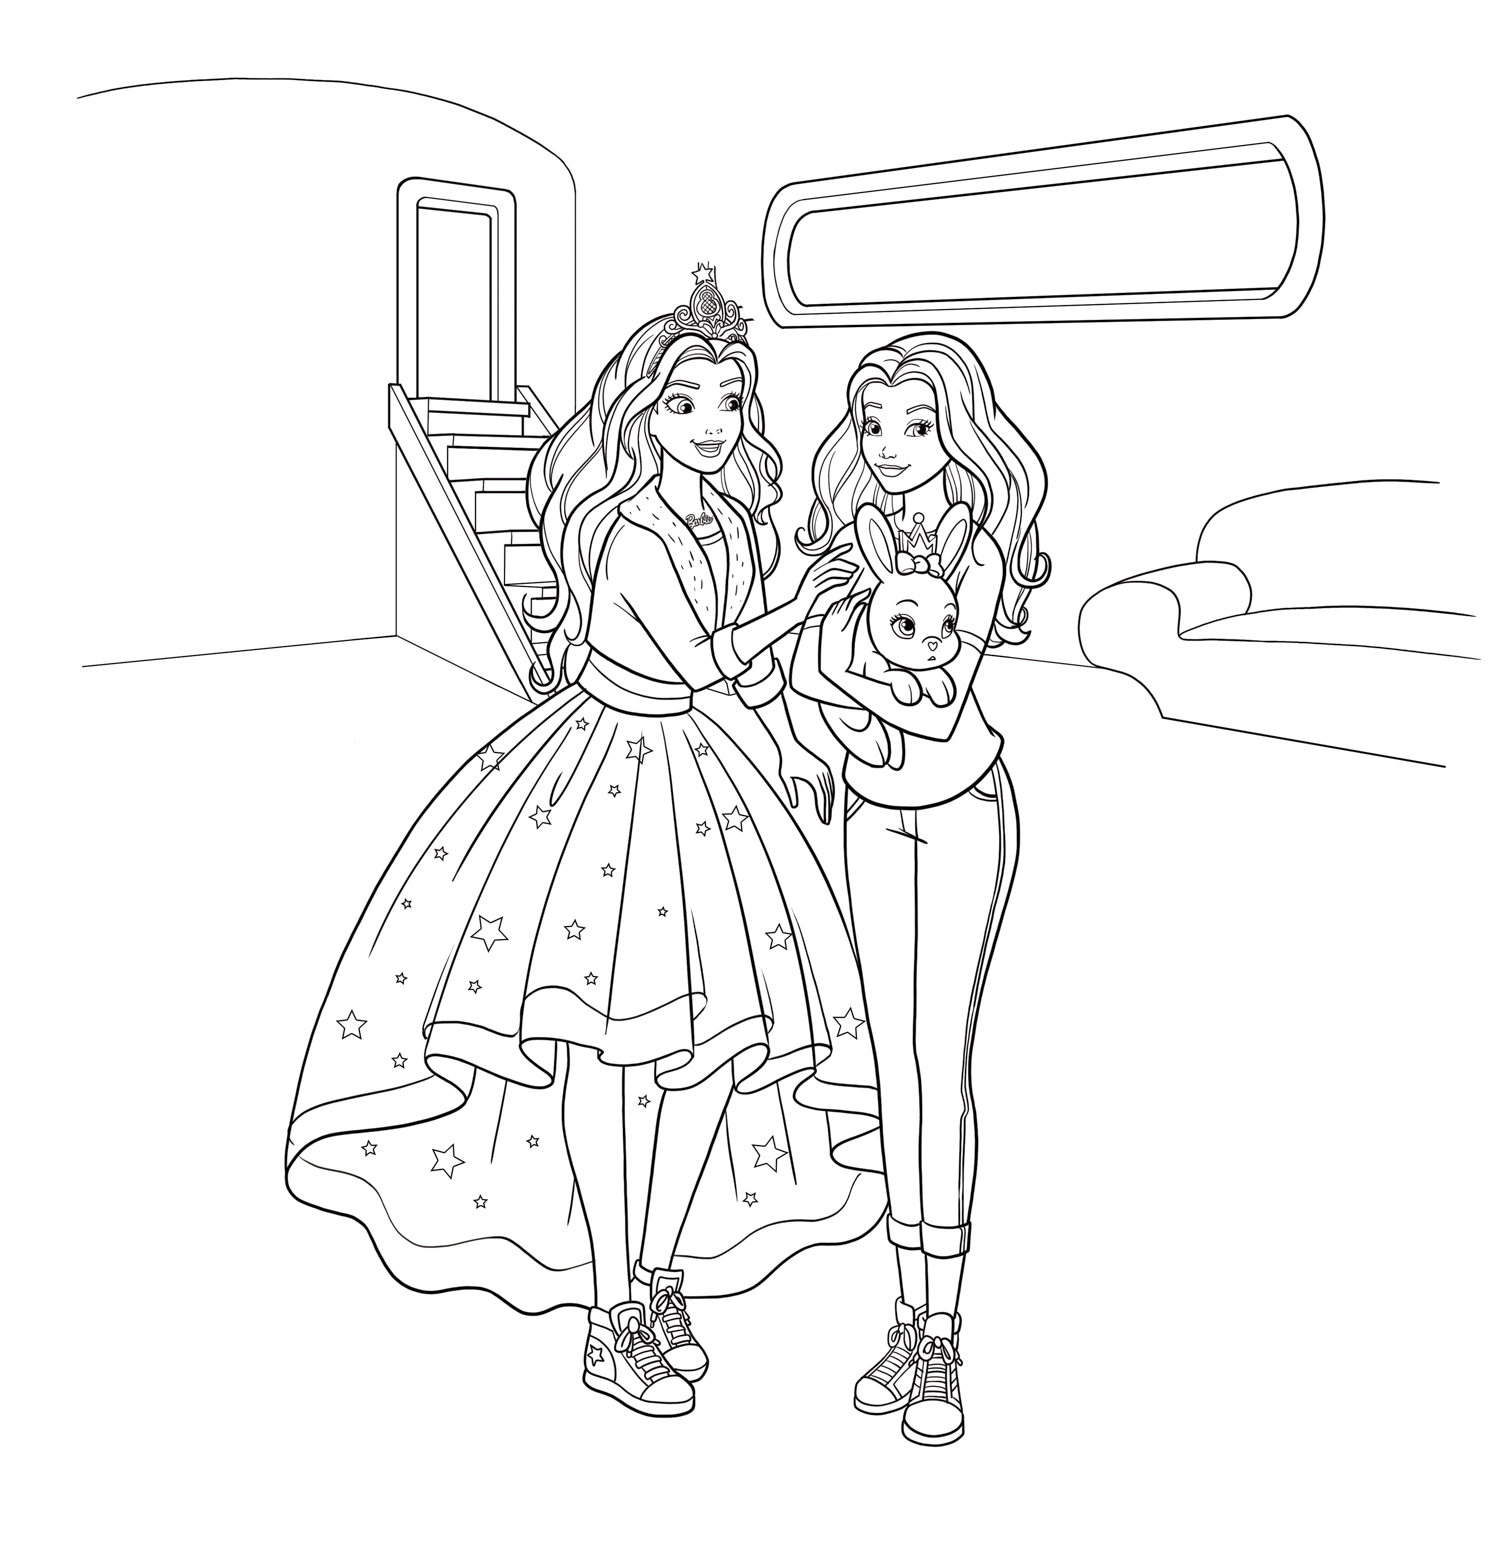 Barbie style coloring page | Barbie coloring pages, Mermaid coloring pages, Barbie  coloring